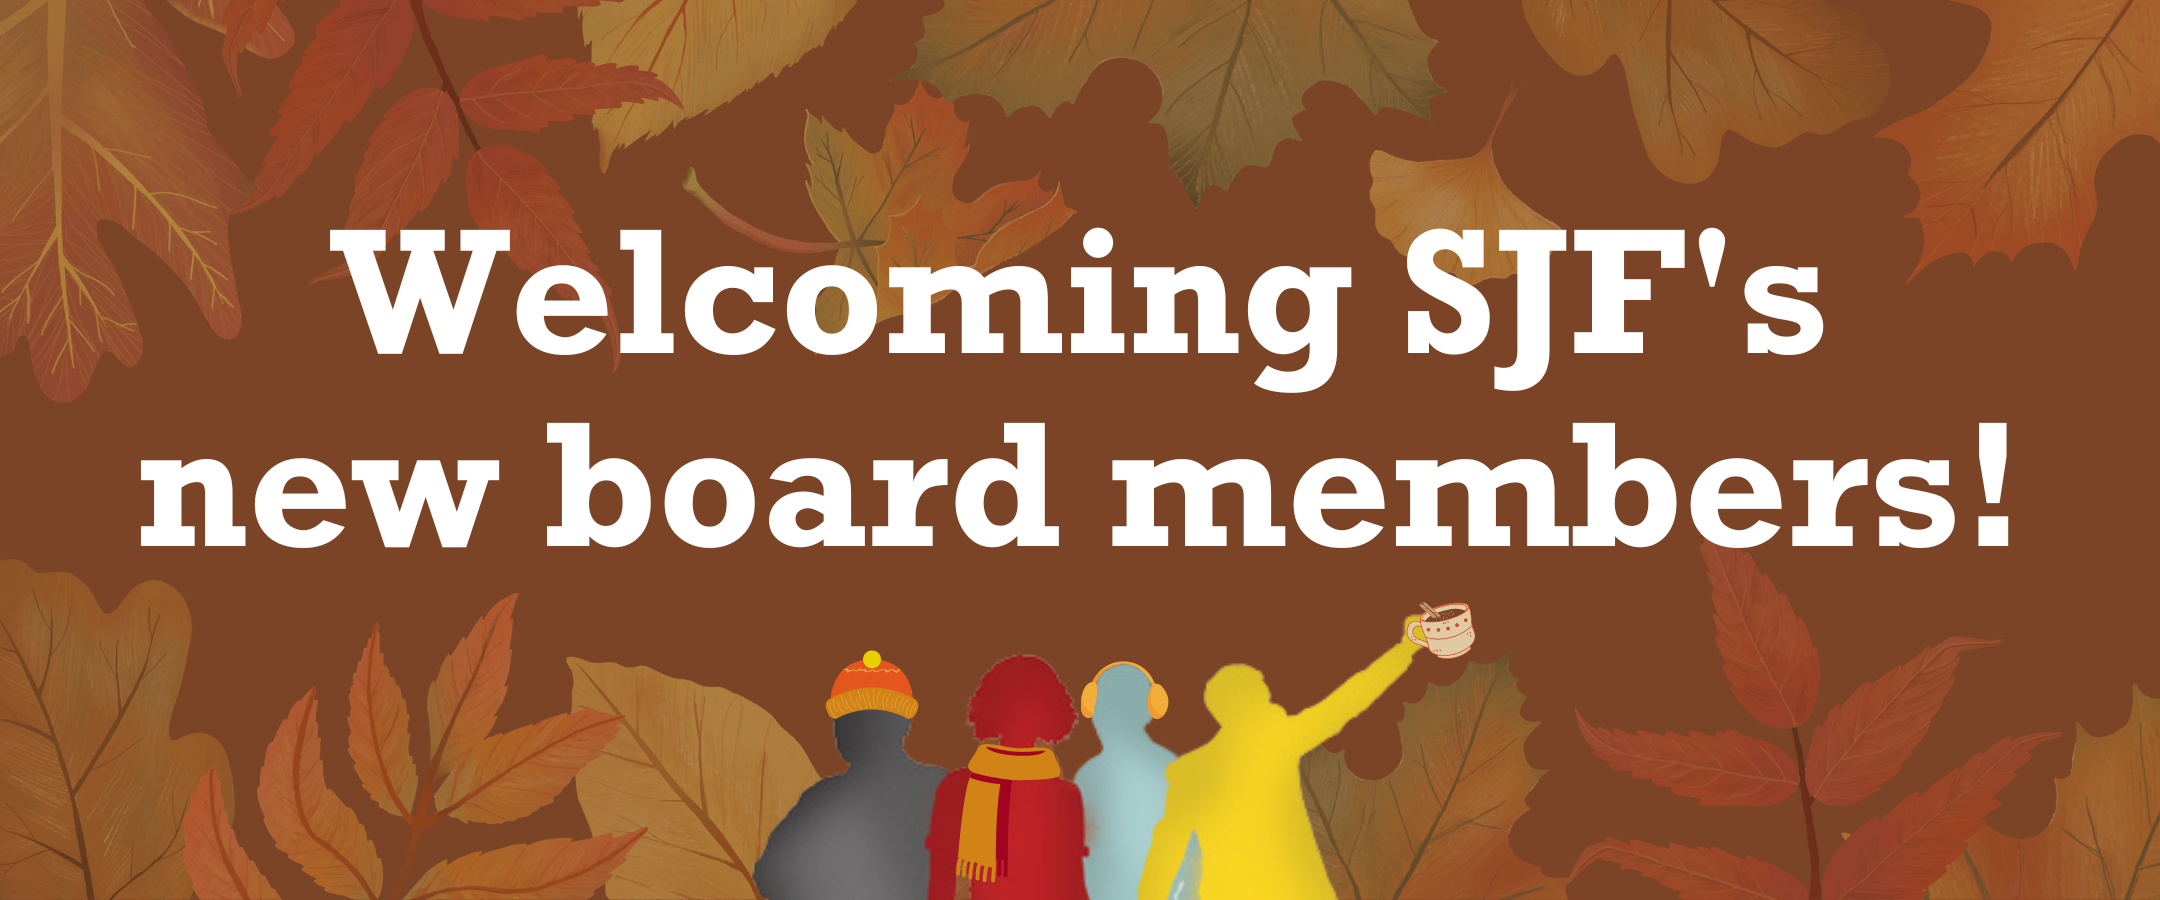 Brown banner image with background of fall leaves. Text reads Welcoming SJFs new board members. There is an illustration of four people standing together in silhouette wearing cozy hats scarves earmuffs and lifting a mug of cocoa in the bottom center